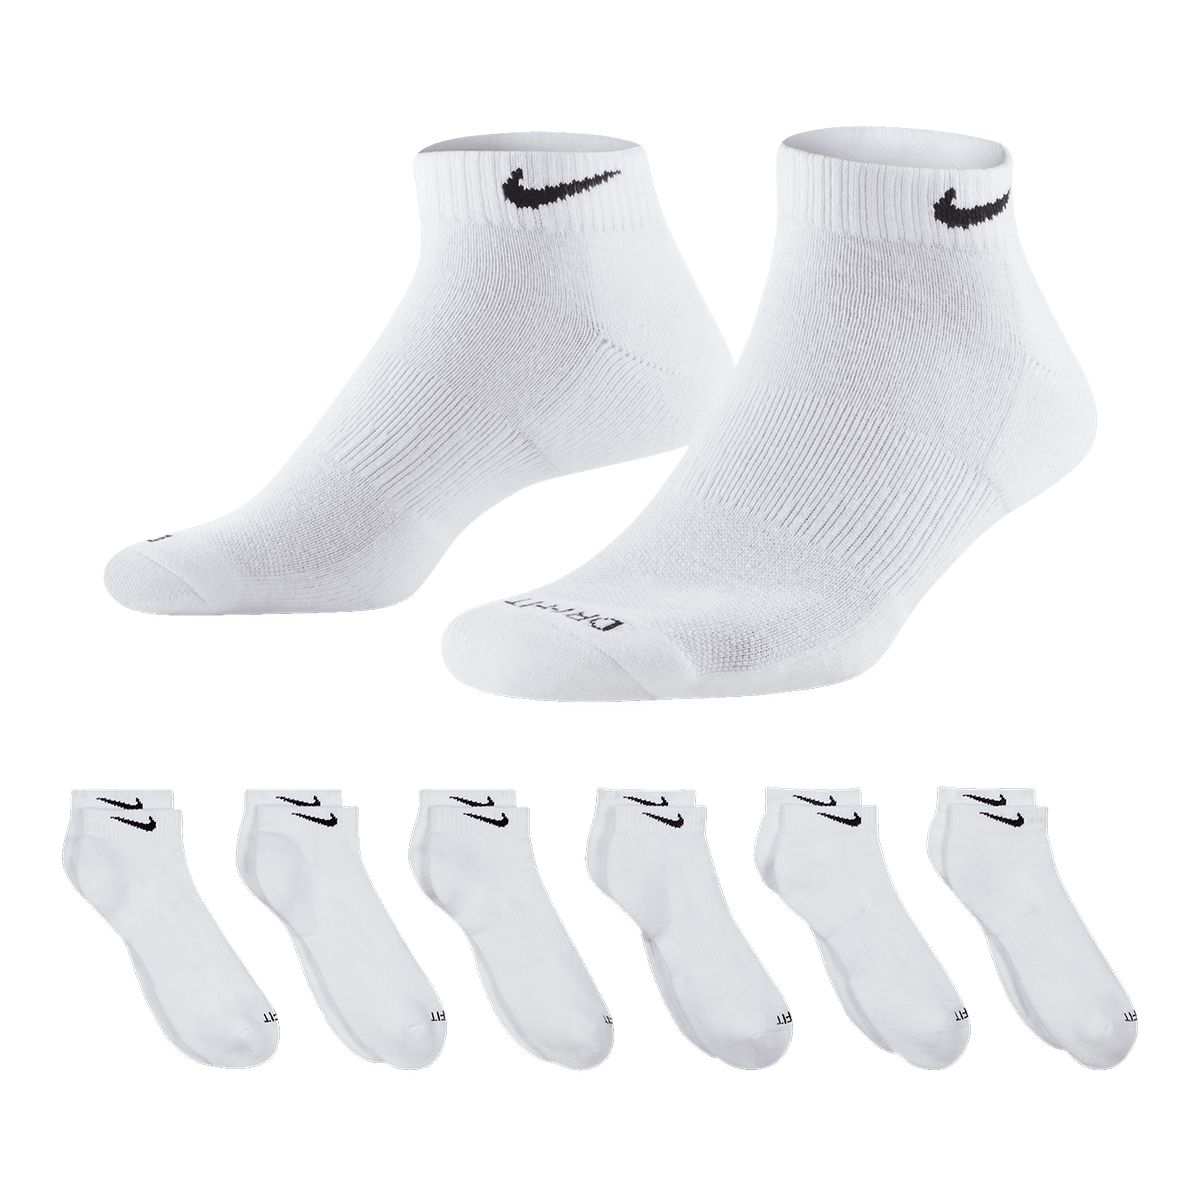 https://media-www.sportchek.ca/product/div-03-softgoods/dpt-79-clothing-accessories/sdpt-01-mens/332679224/nike-everyday-plus-athletic-low-socks-breathable-6-pack-195332c2-2c8c-490e-91c1-c576c15d7876-jpgrendition.jpg?imdensity=1&imwidth=1244&impolicy=mZoom